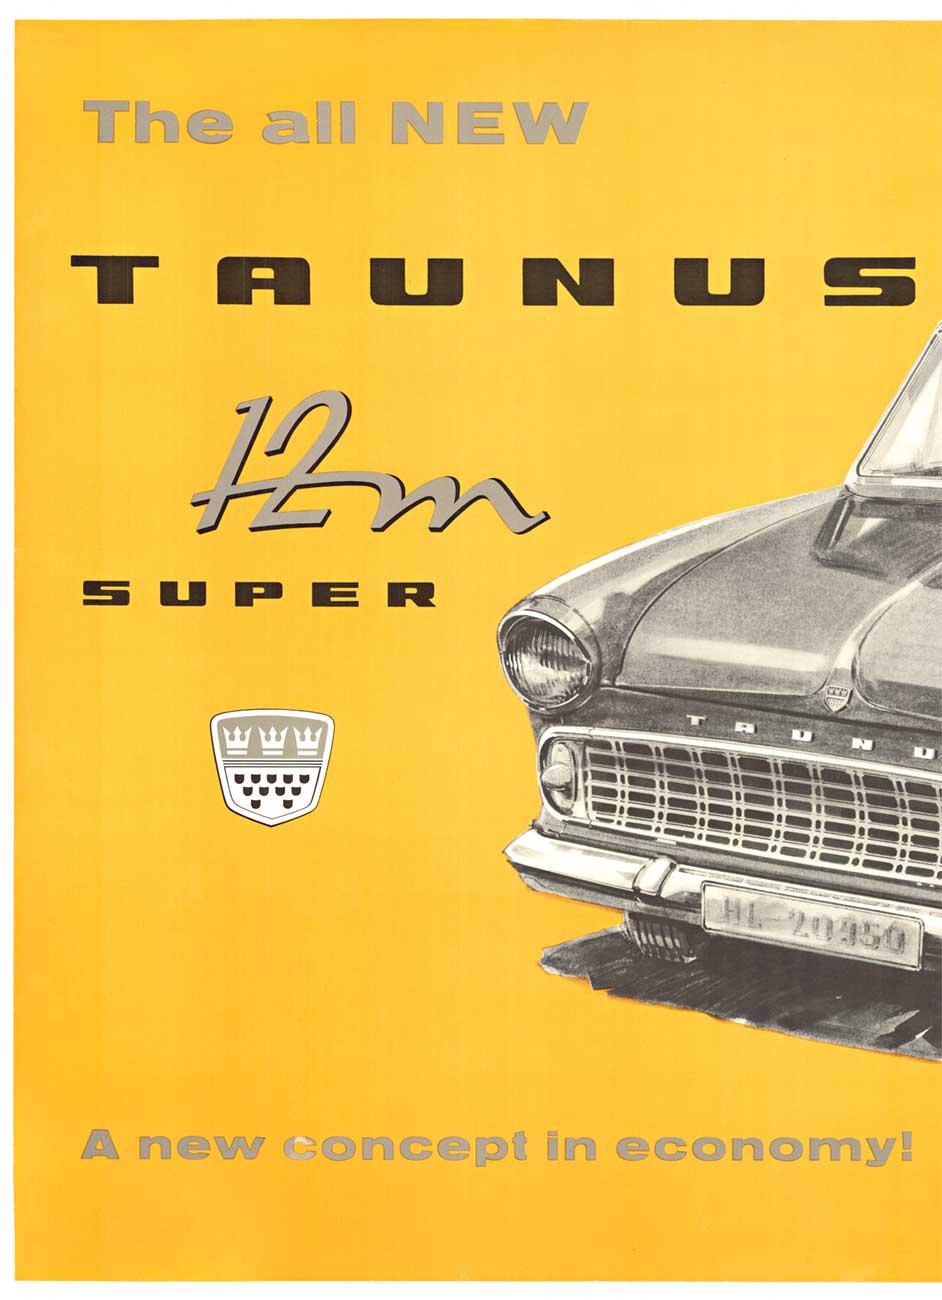 Original Ford, The all New Taunus 12M Super vintage German poster - Print by Unknown